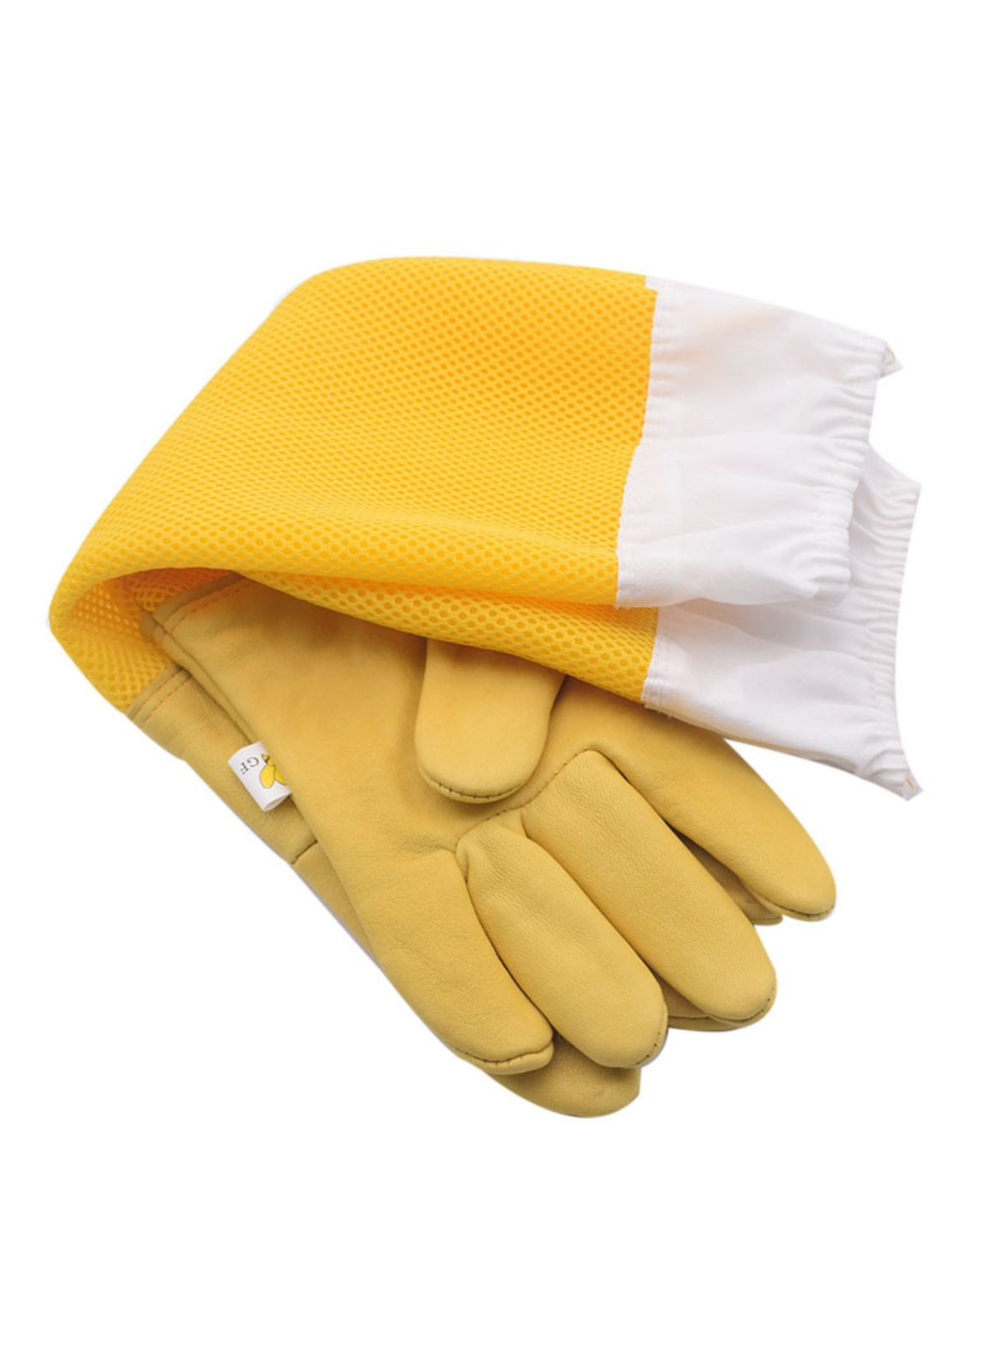 A full view of Yellow Beekeeping Protective Gloves with excellent texture.